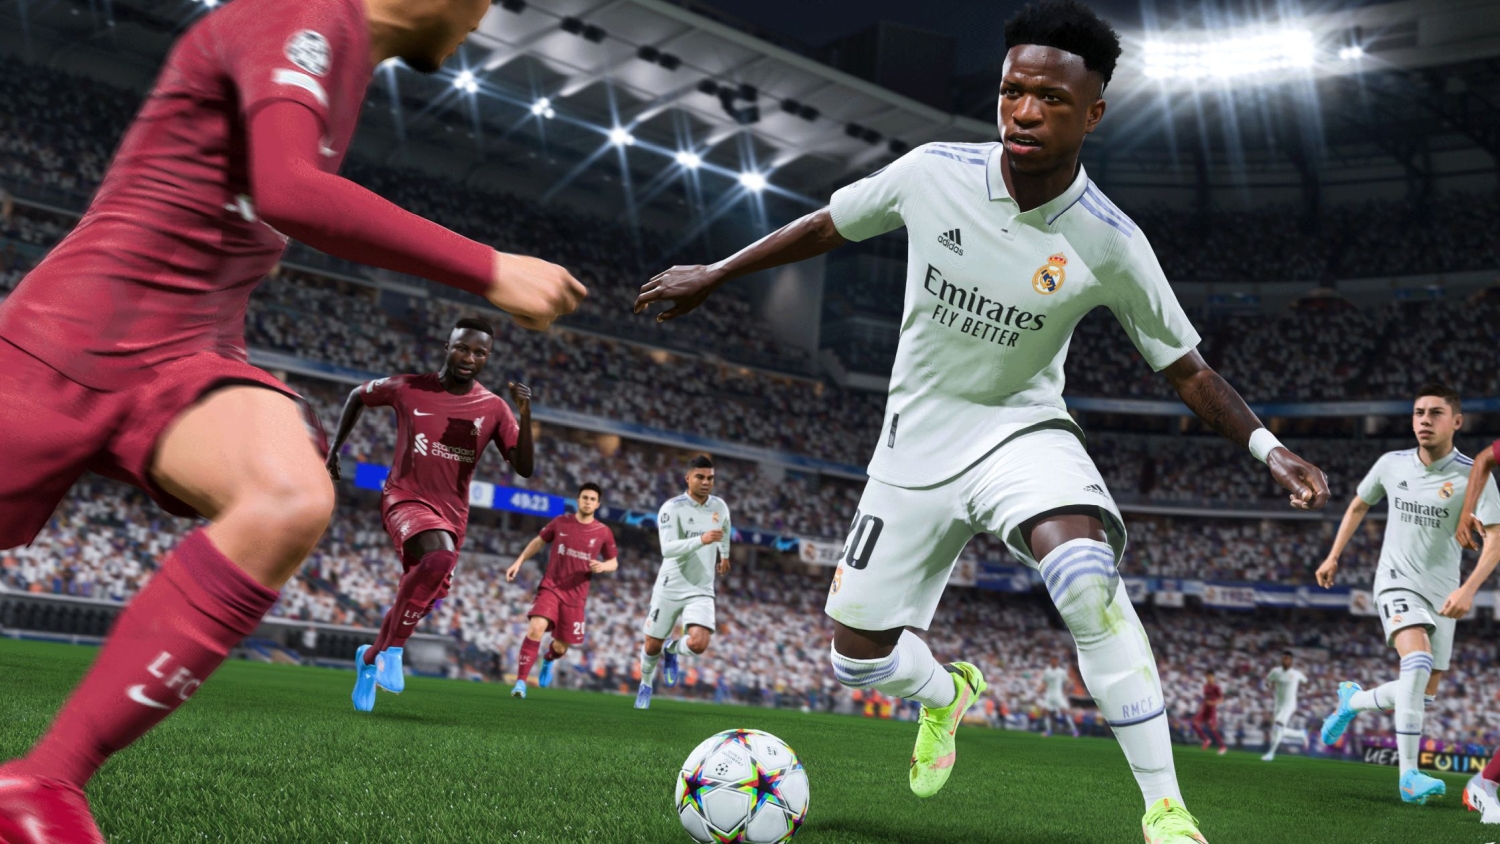 Liverpool FC - Out today: EA SPORTS FIFA 15 on mobile. Free to play on the  App Store, Google Play, or the Windows Phone Store. Download now